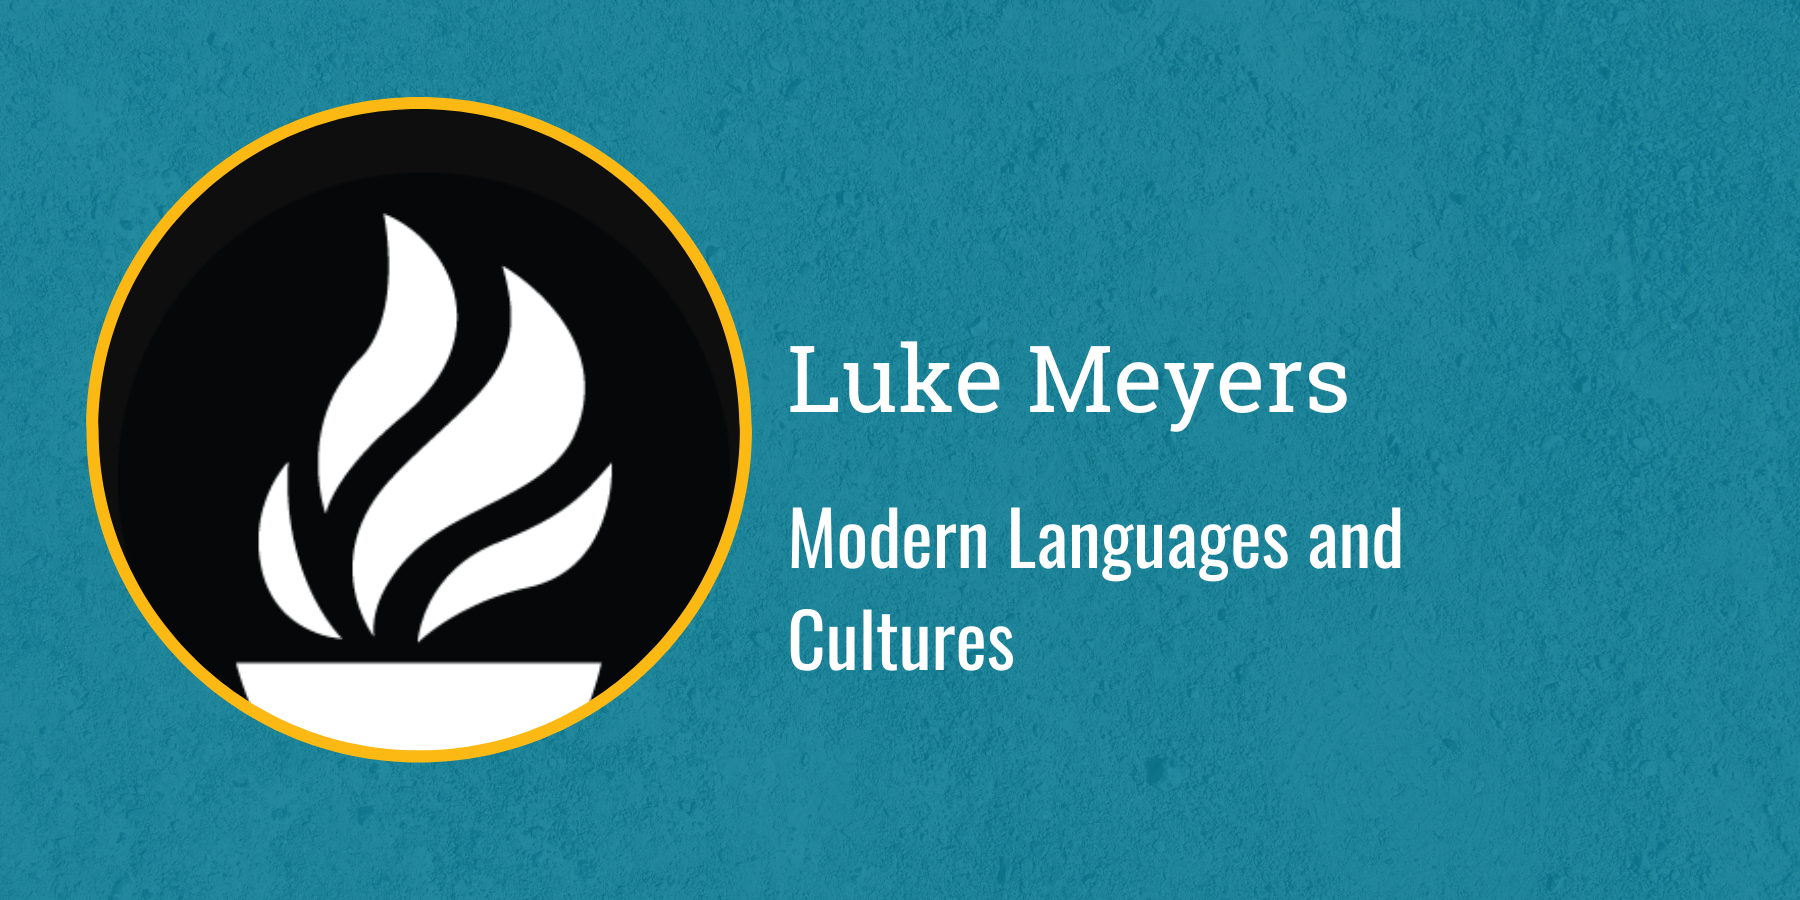 Luke Meyers
Modern Languages and Cultures